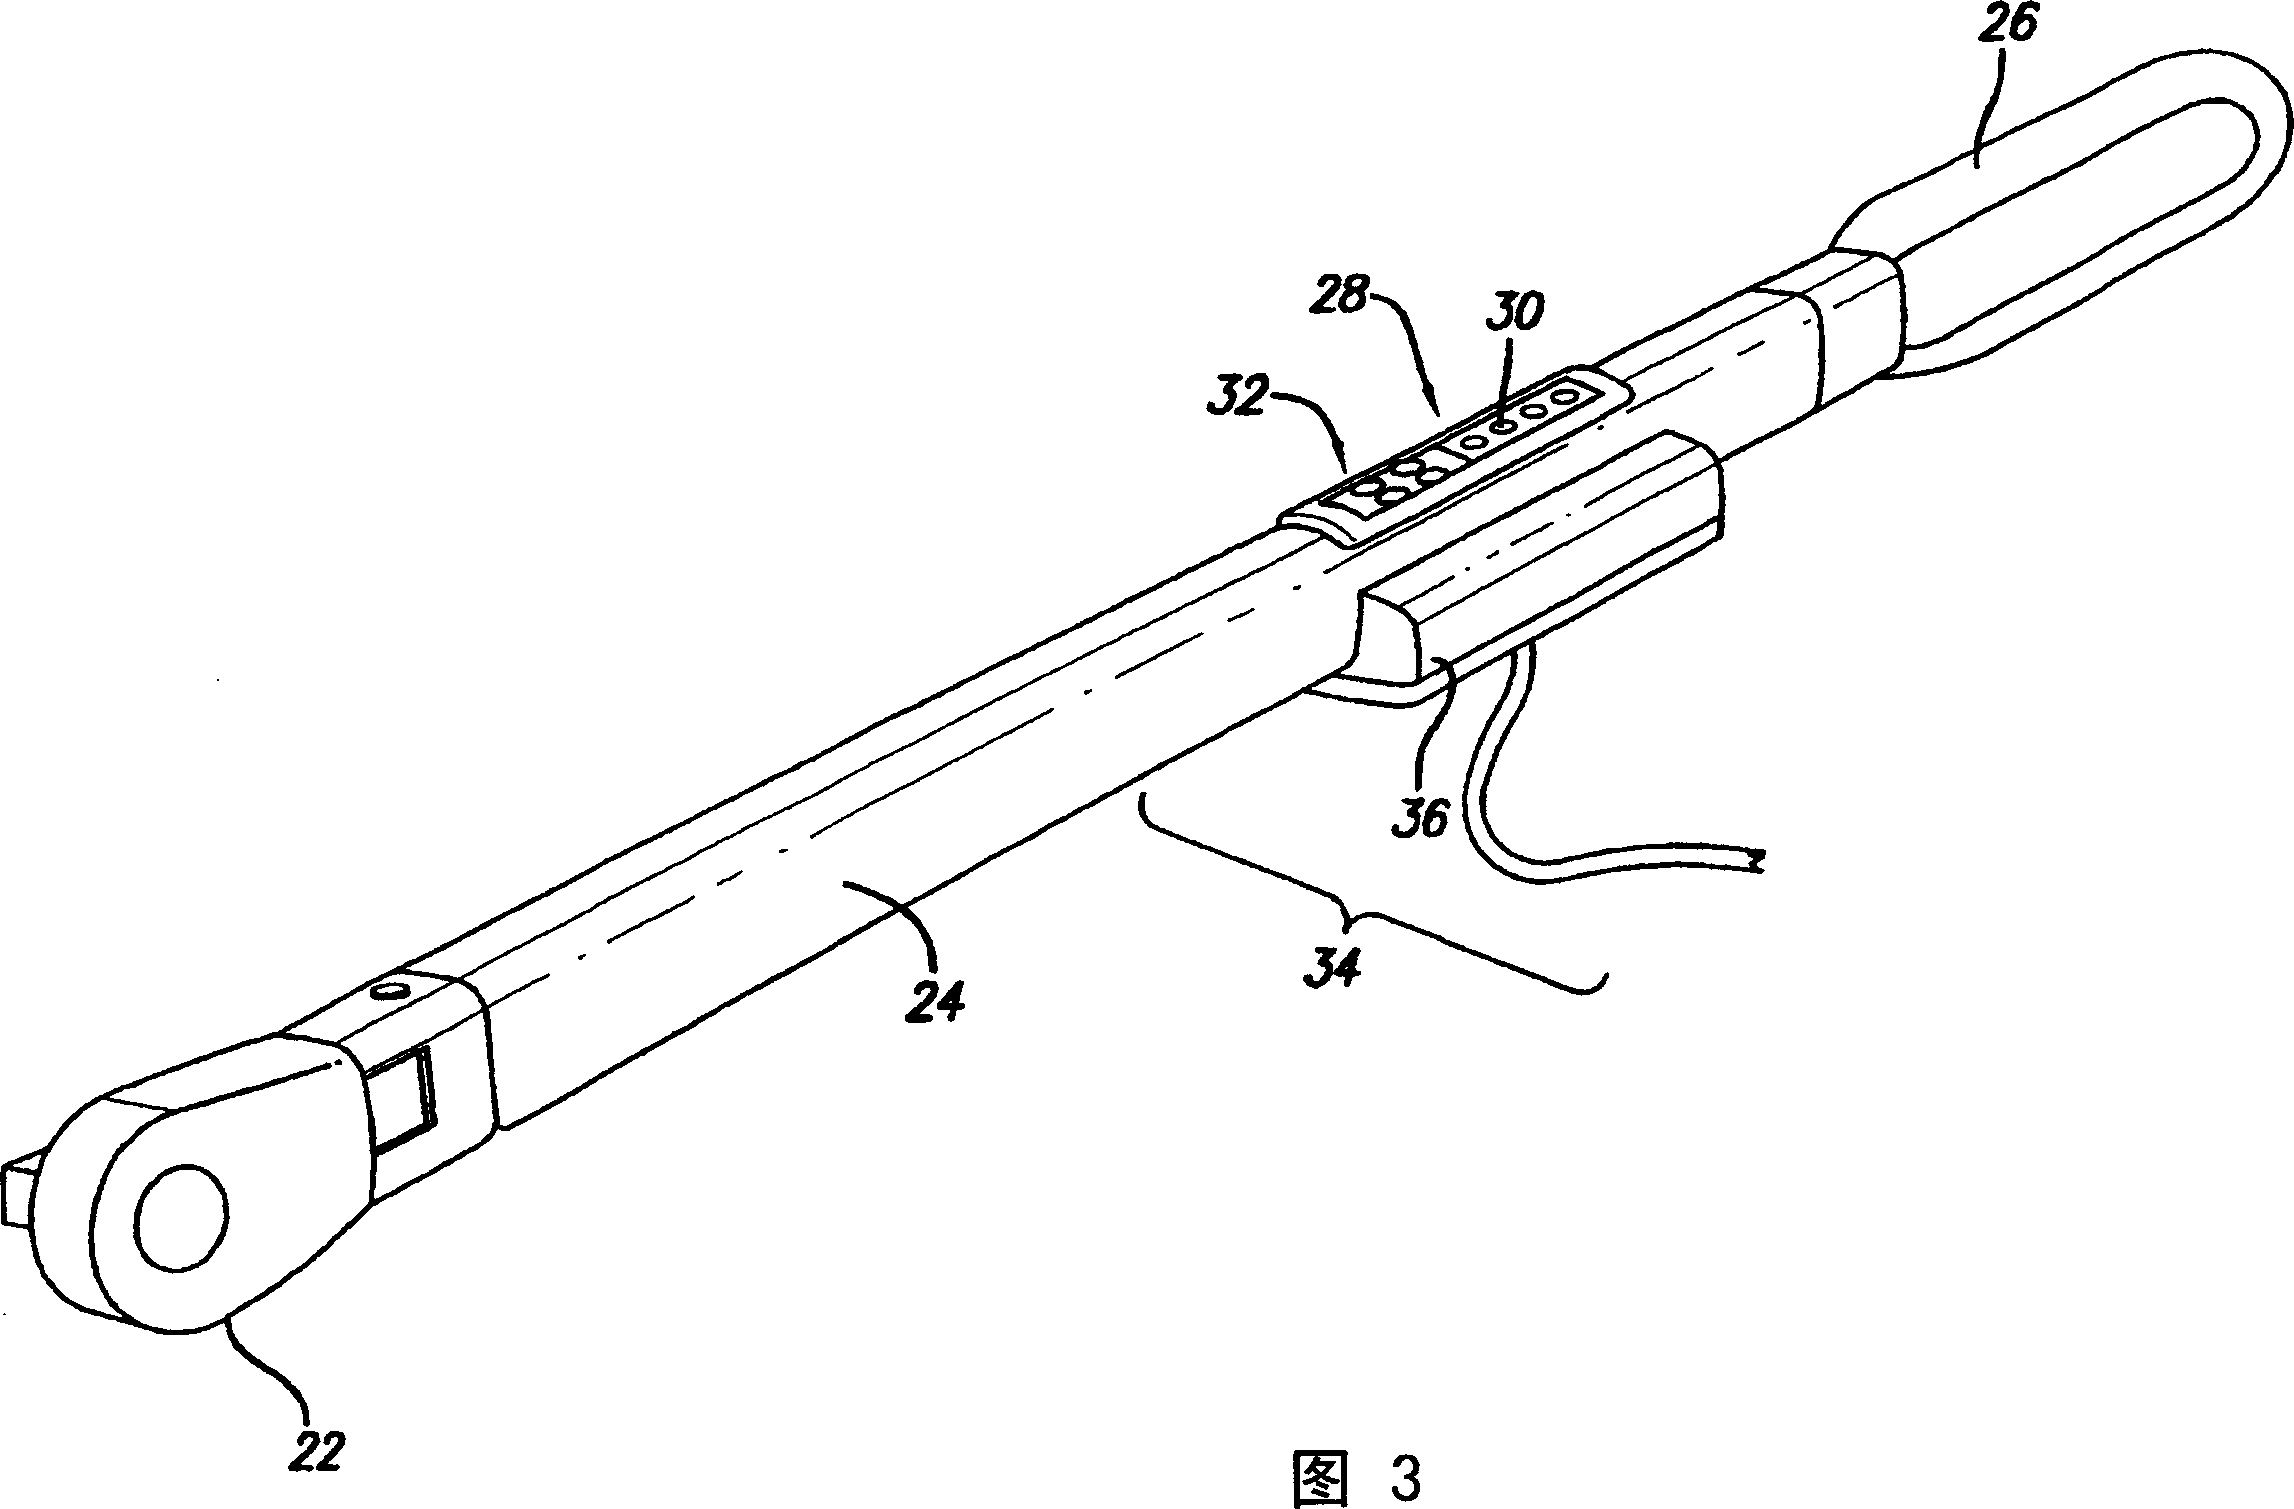 Tool apparatus, system and method of use